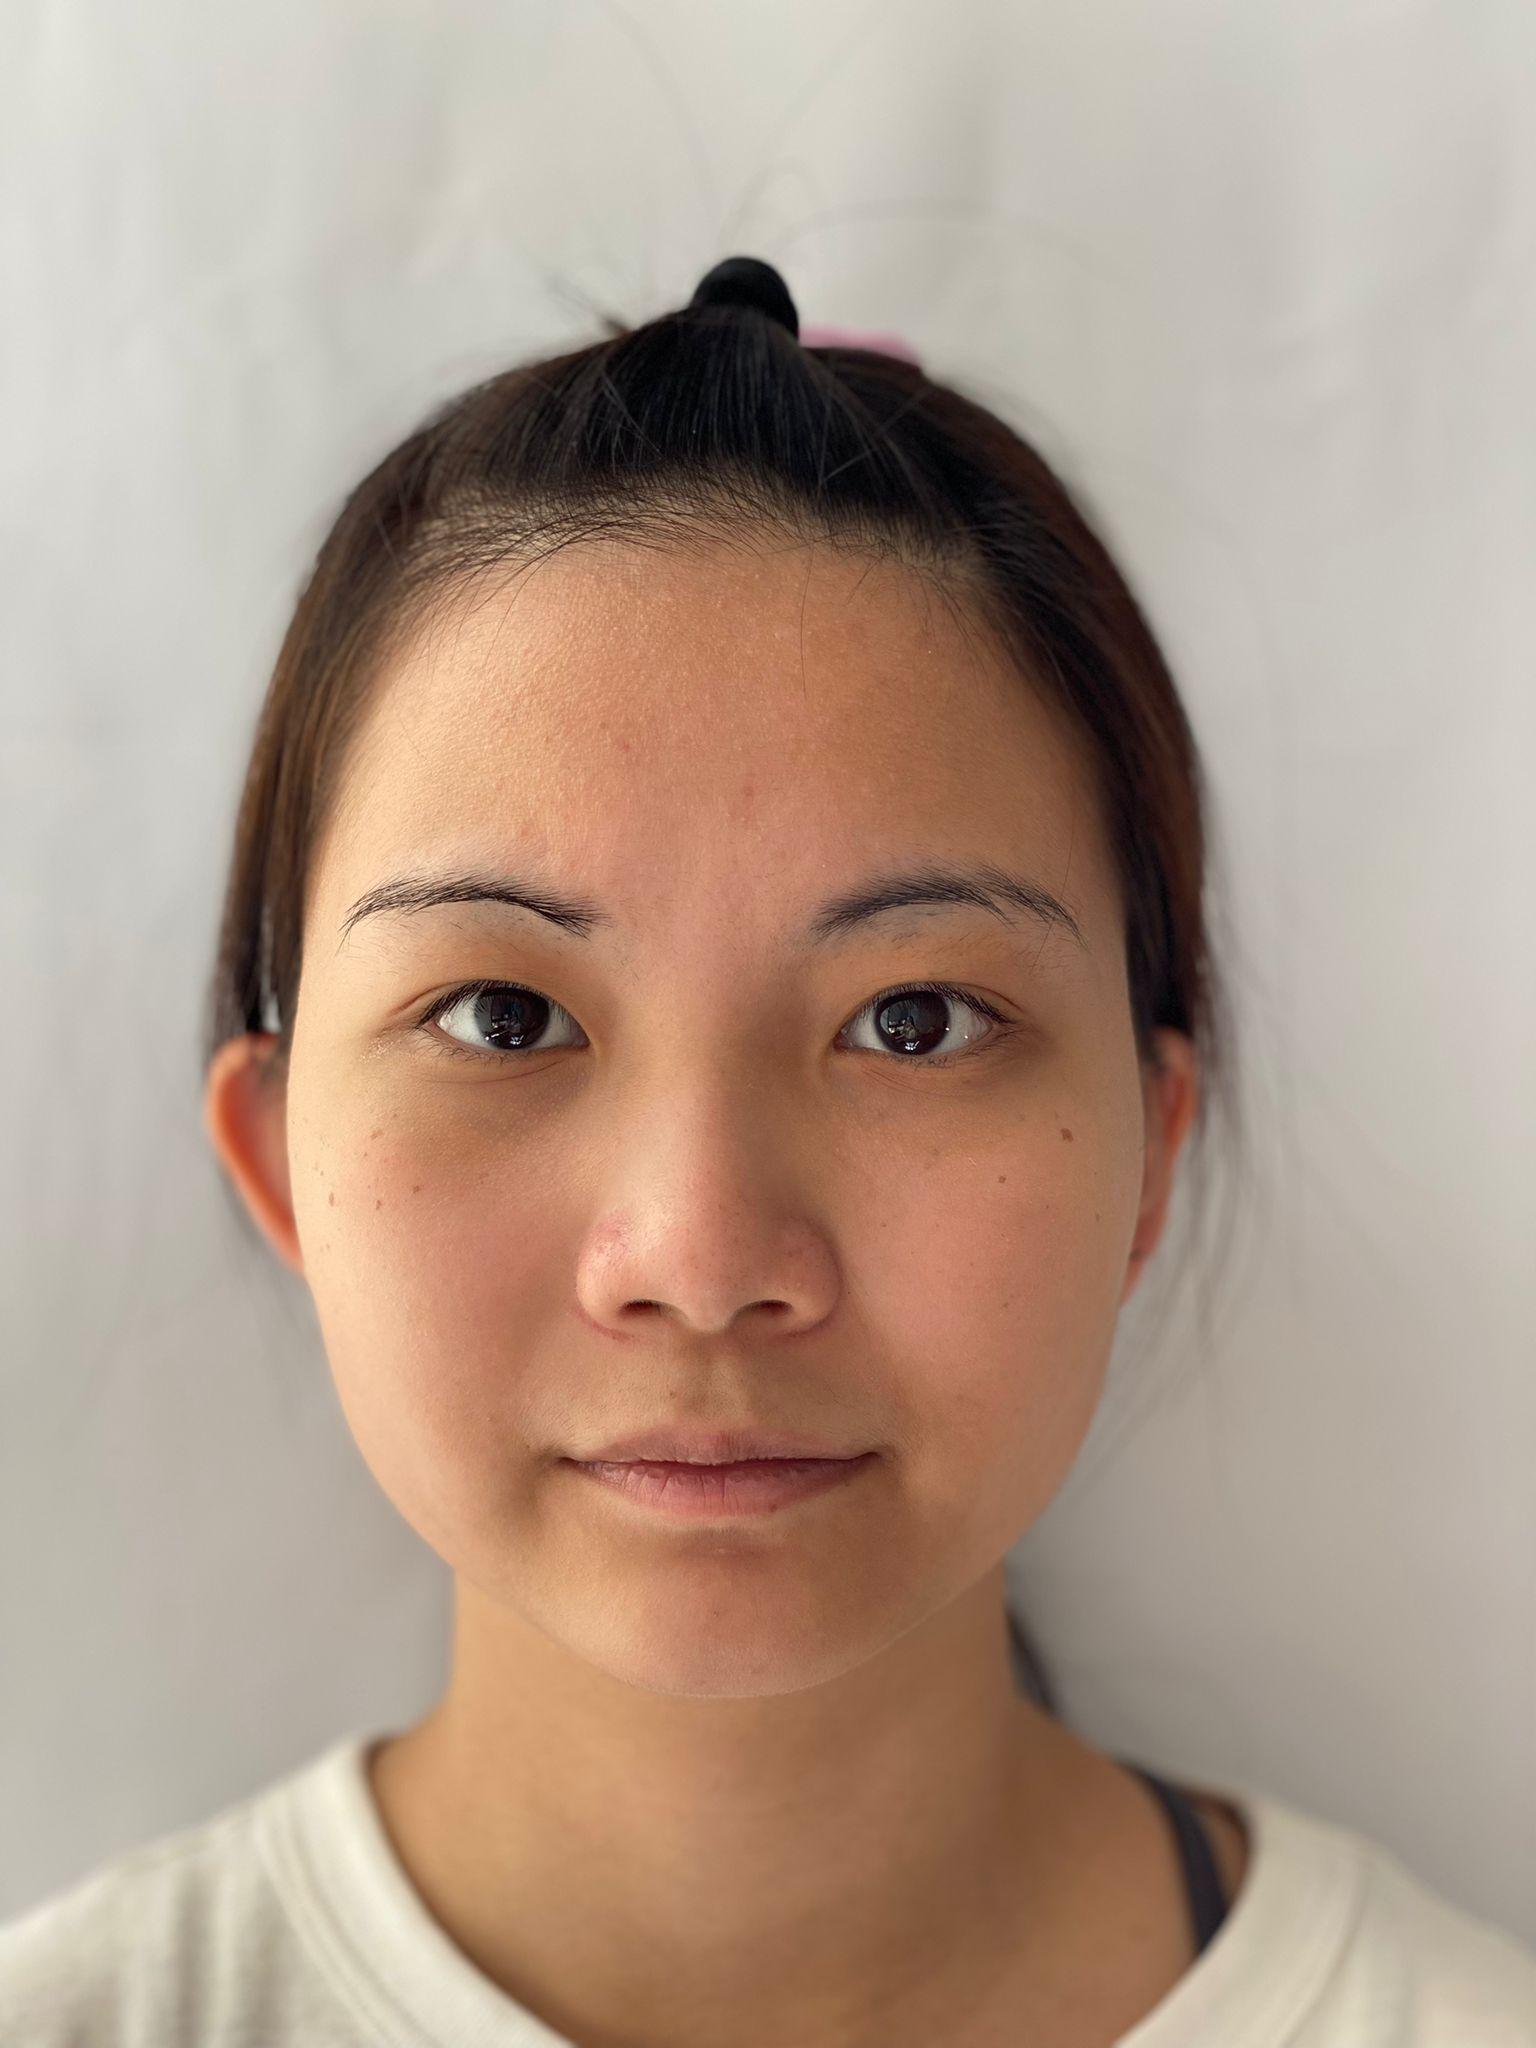 Tse Yee-lam, aged 15, is about 1.6 metres tall, 45 kilograms in weight and of medium build. She has a round face with yellow complexion and long black hair. She was last seen wearing a pink T-shirt, blue trousers, and white sport shoes.
